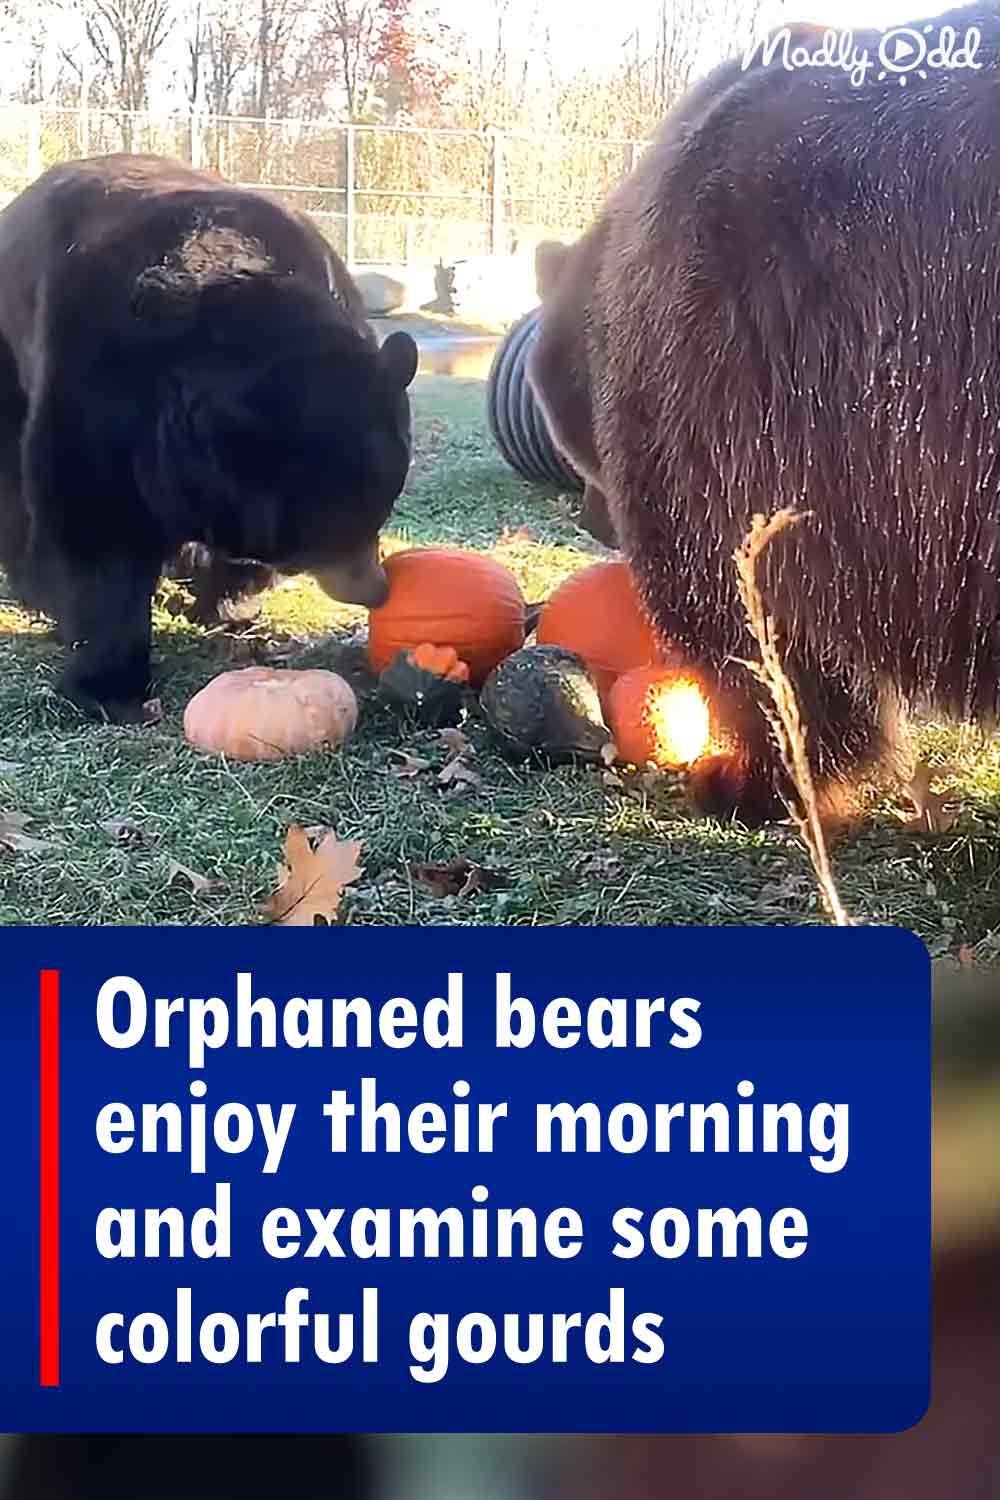 Orphaned bears enjoy their morning and examine some colorful gourds